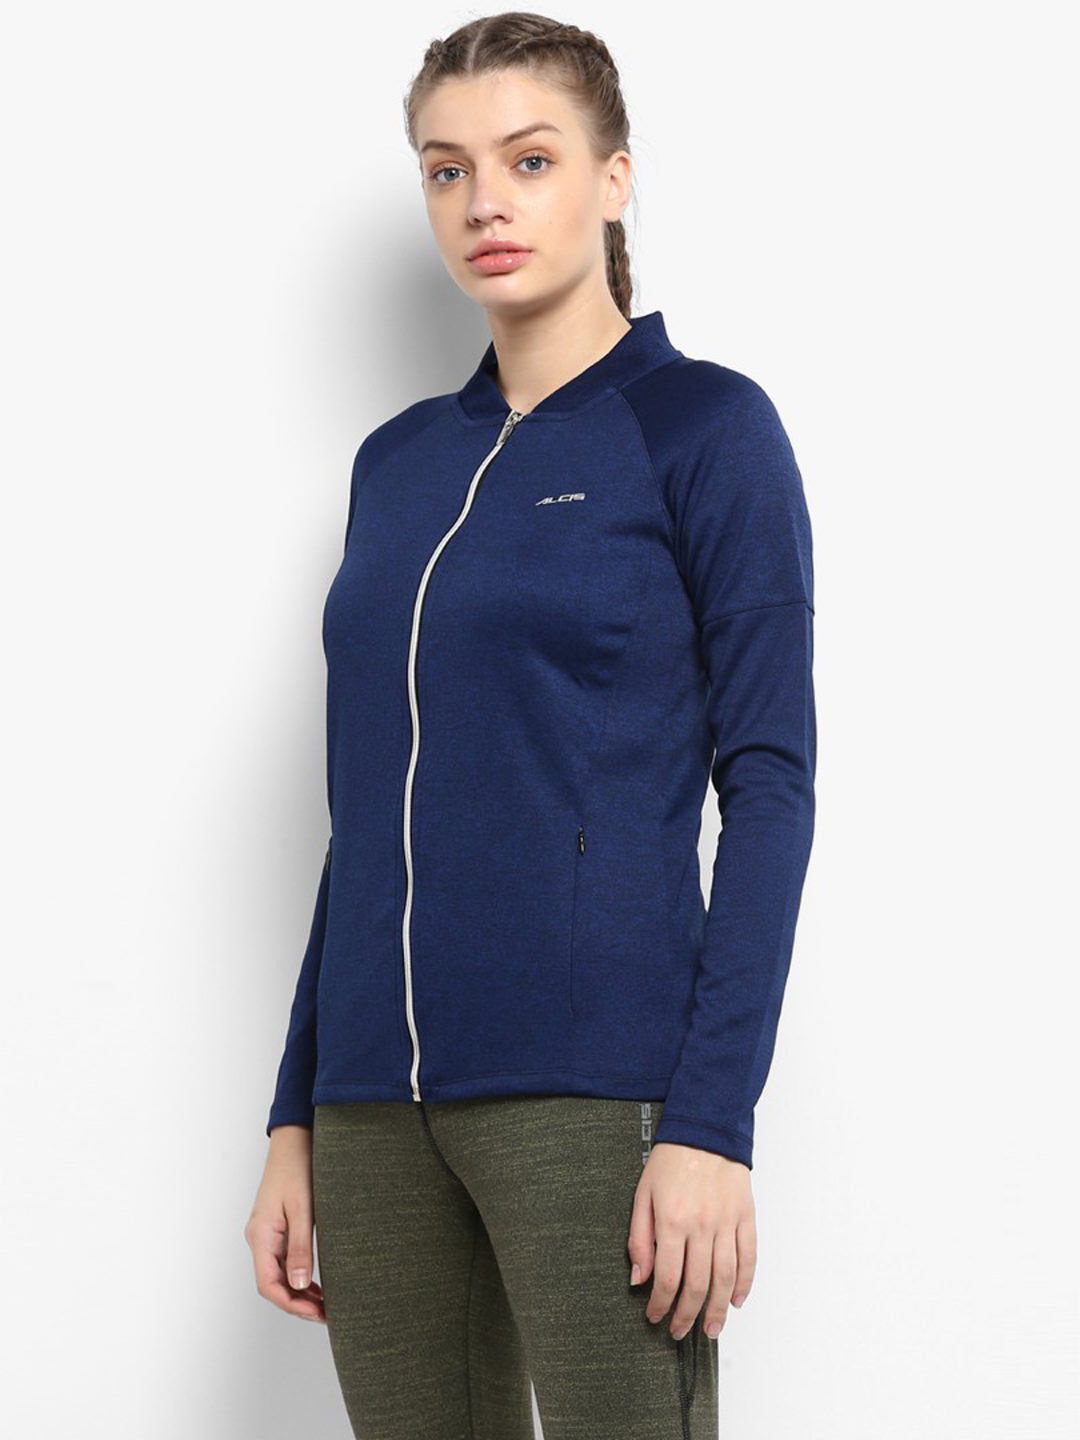 Alcis Women Navy Blue Solid Jackets